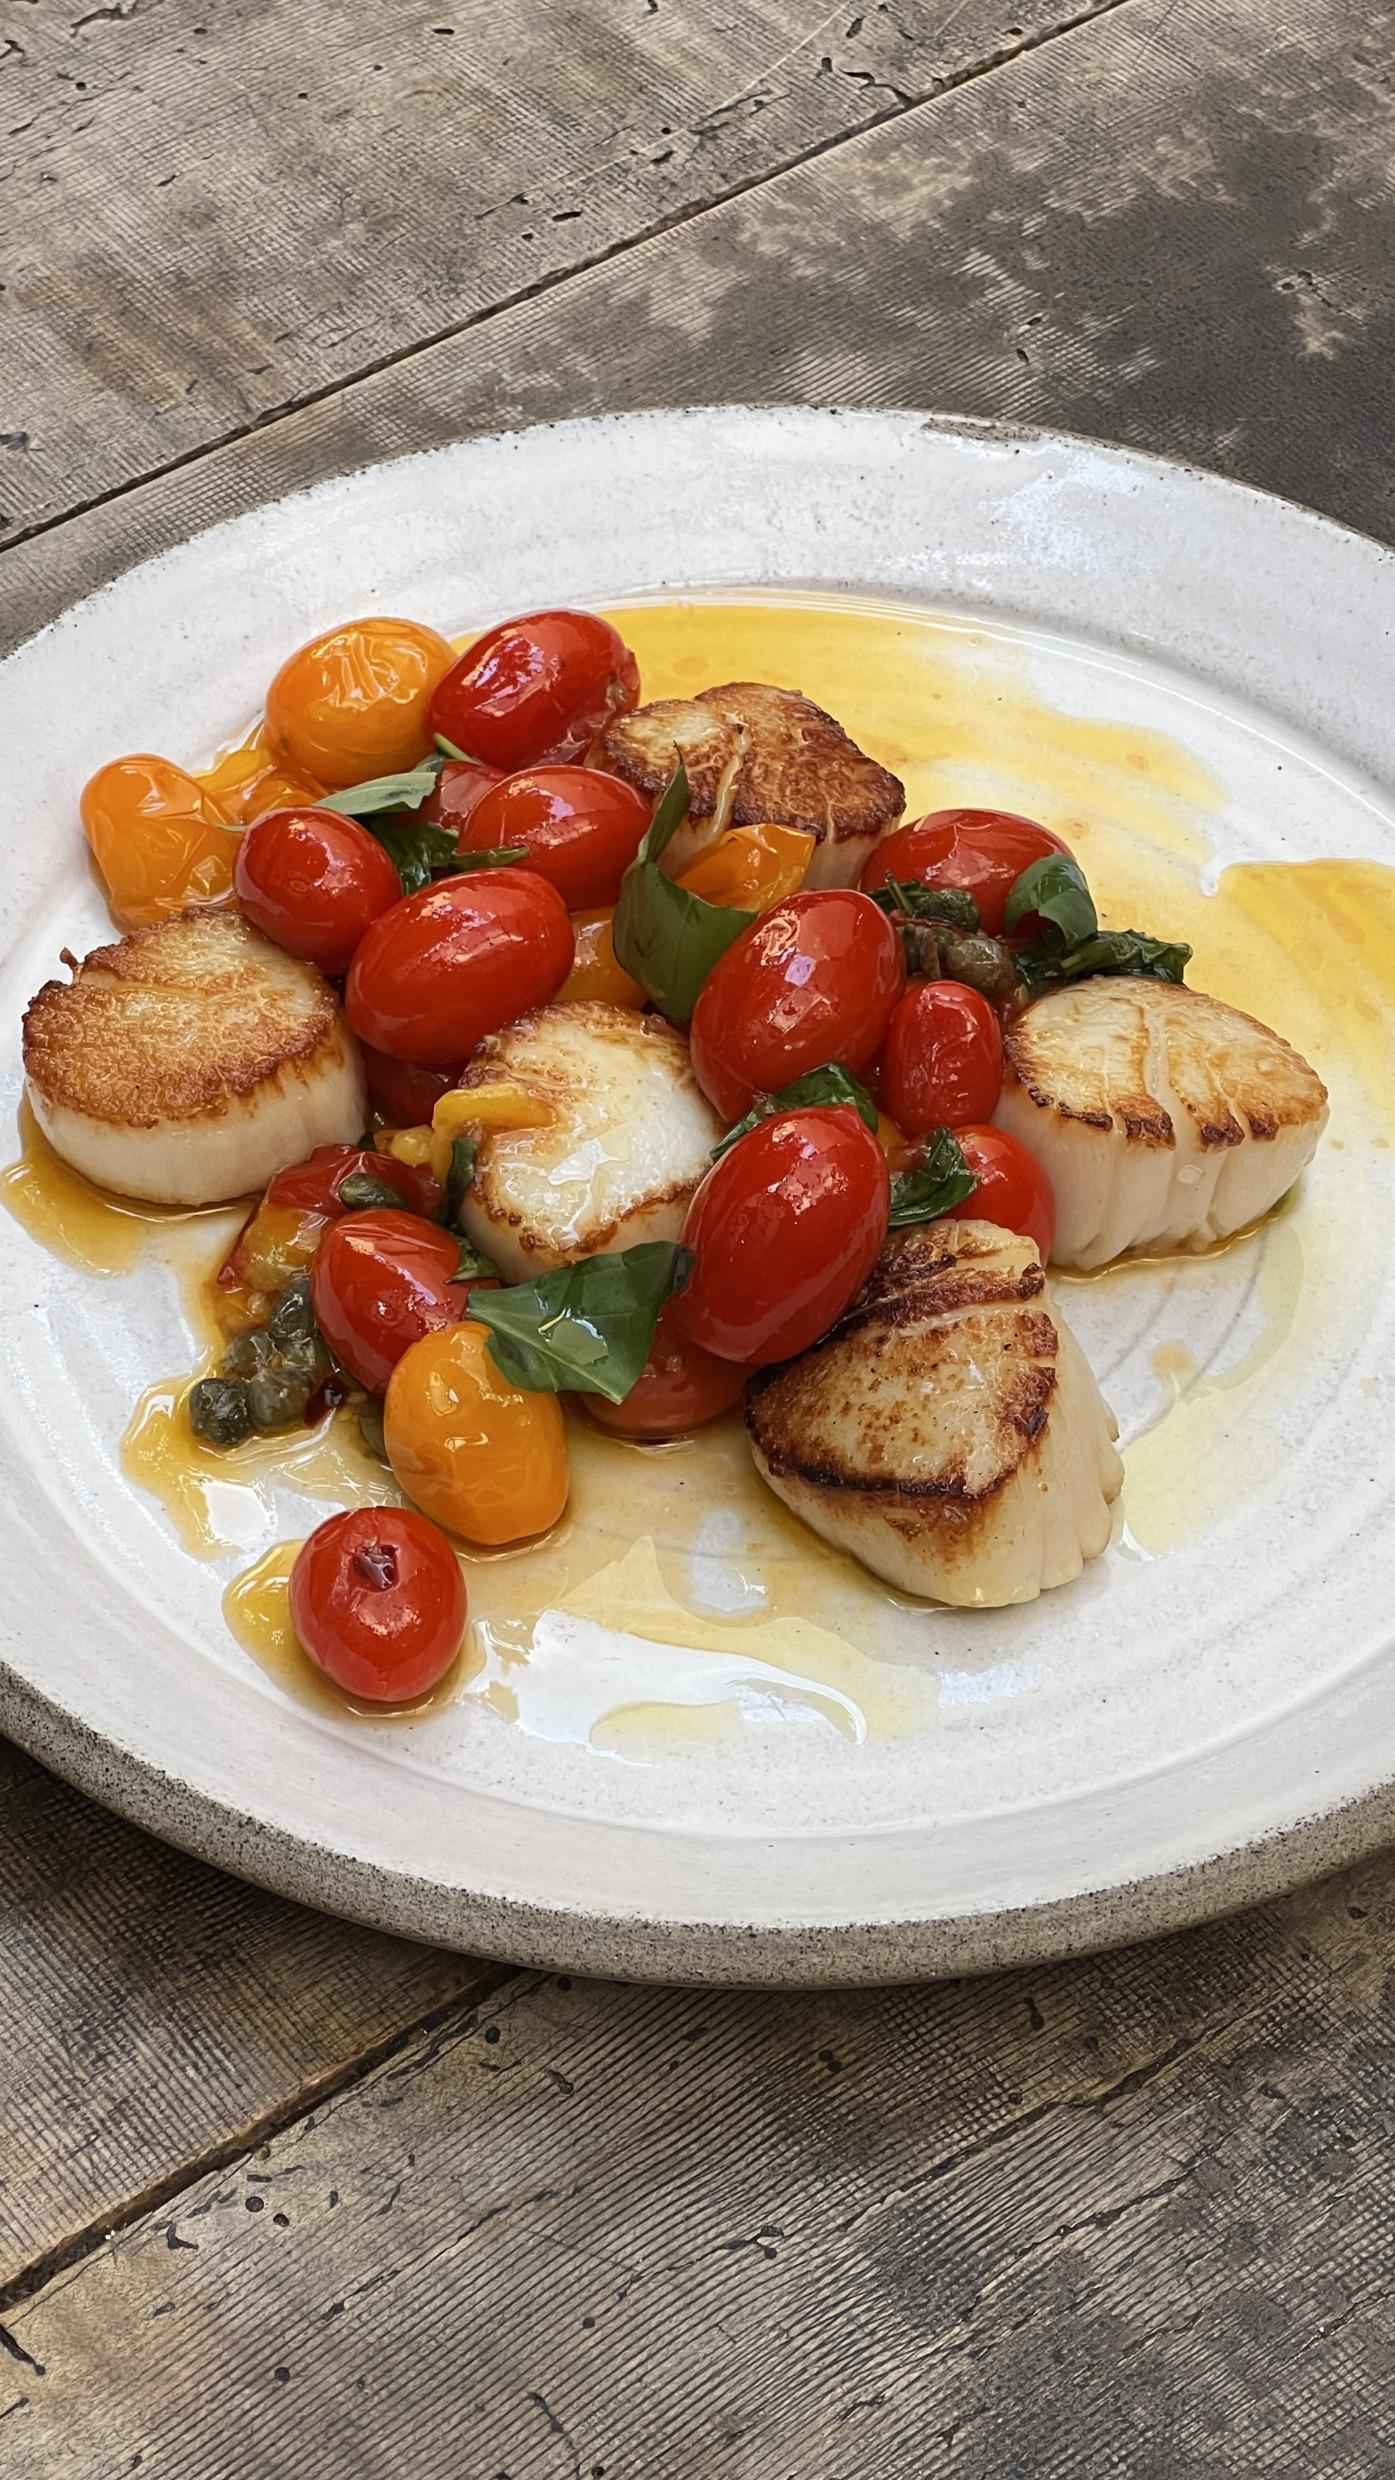 A plate with scallops, tomatoes, basil and vinaigrette.